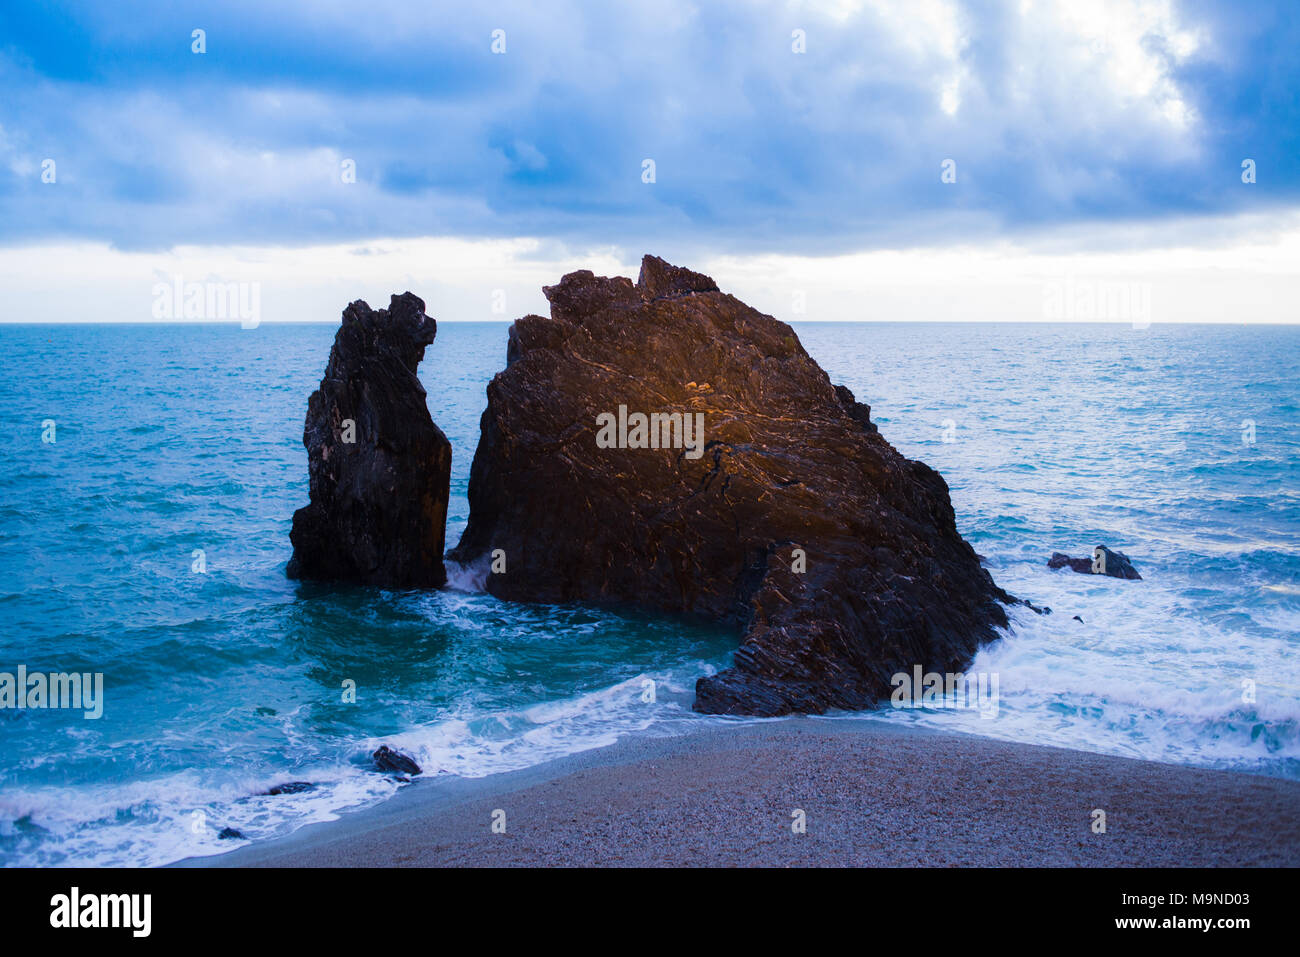 Black dark rock eroded cliff rising from the sea close to a sandy beach Stock Photo